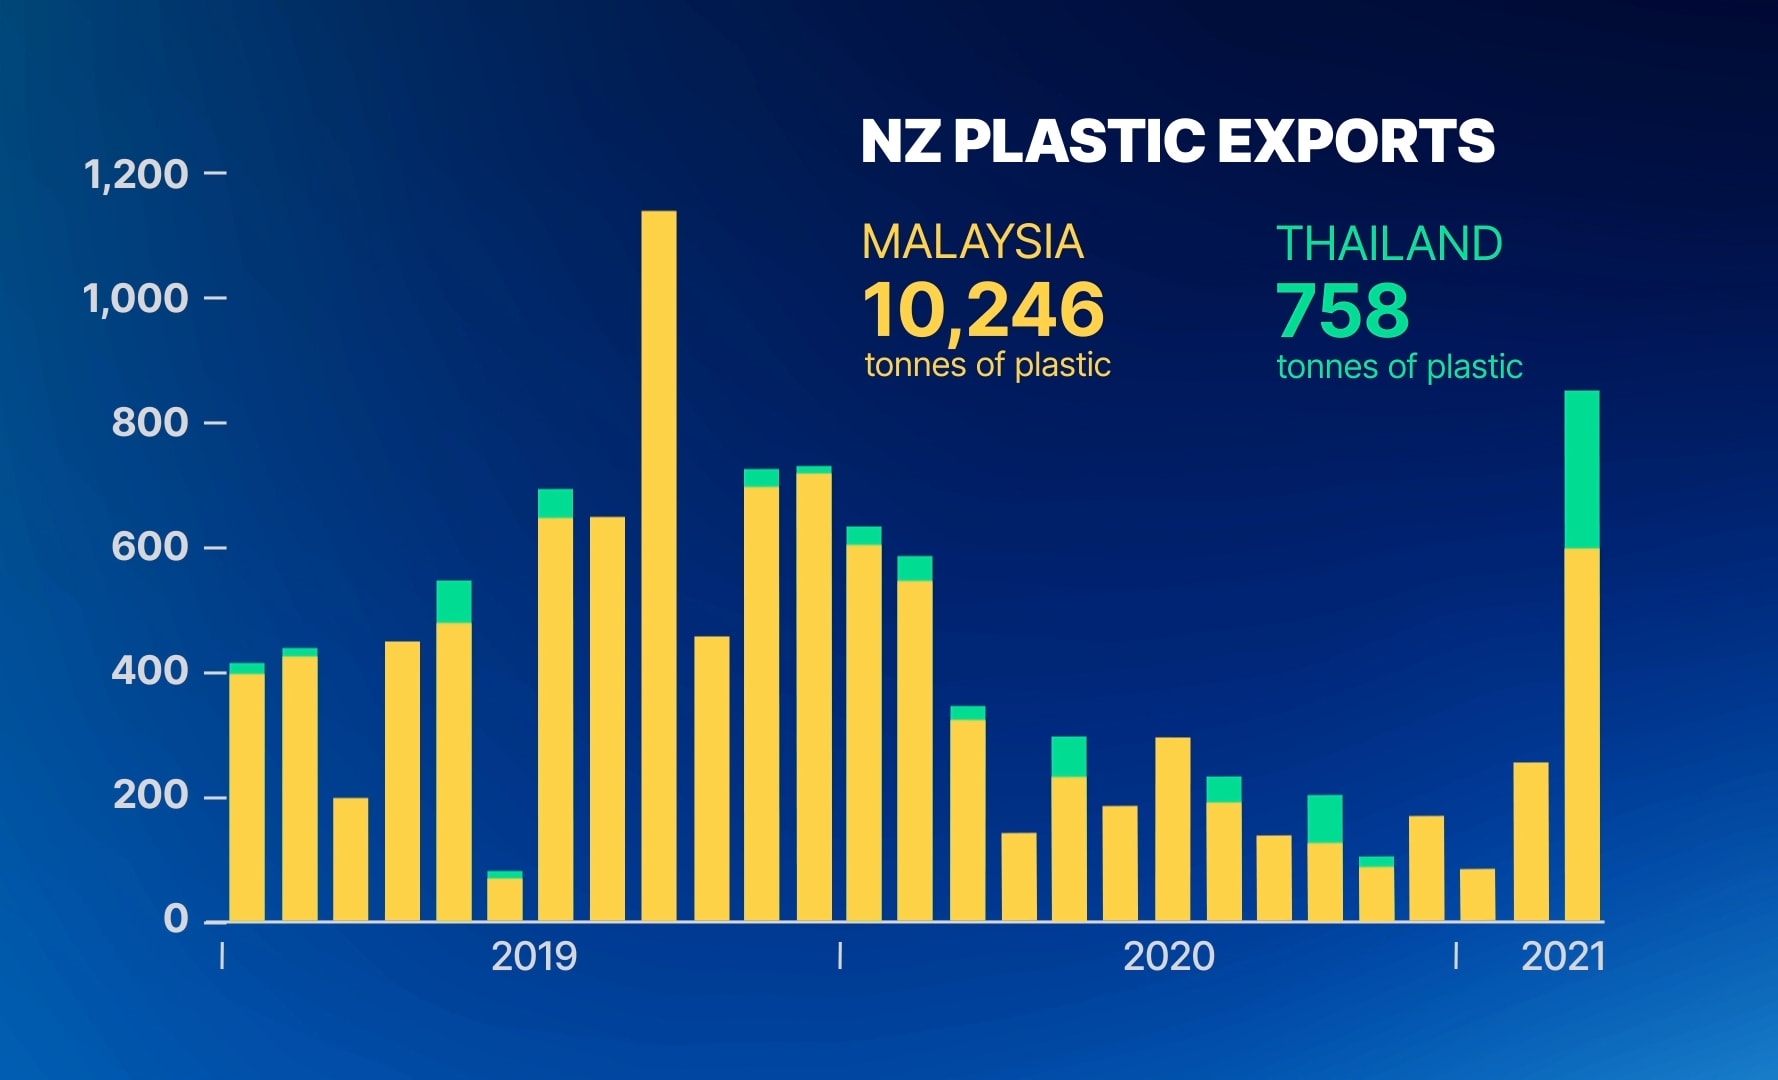 NZ plastic exports to Malaysia.